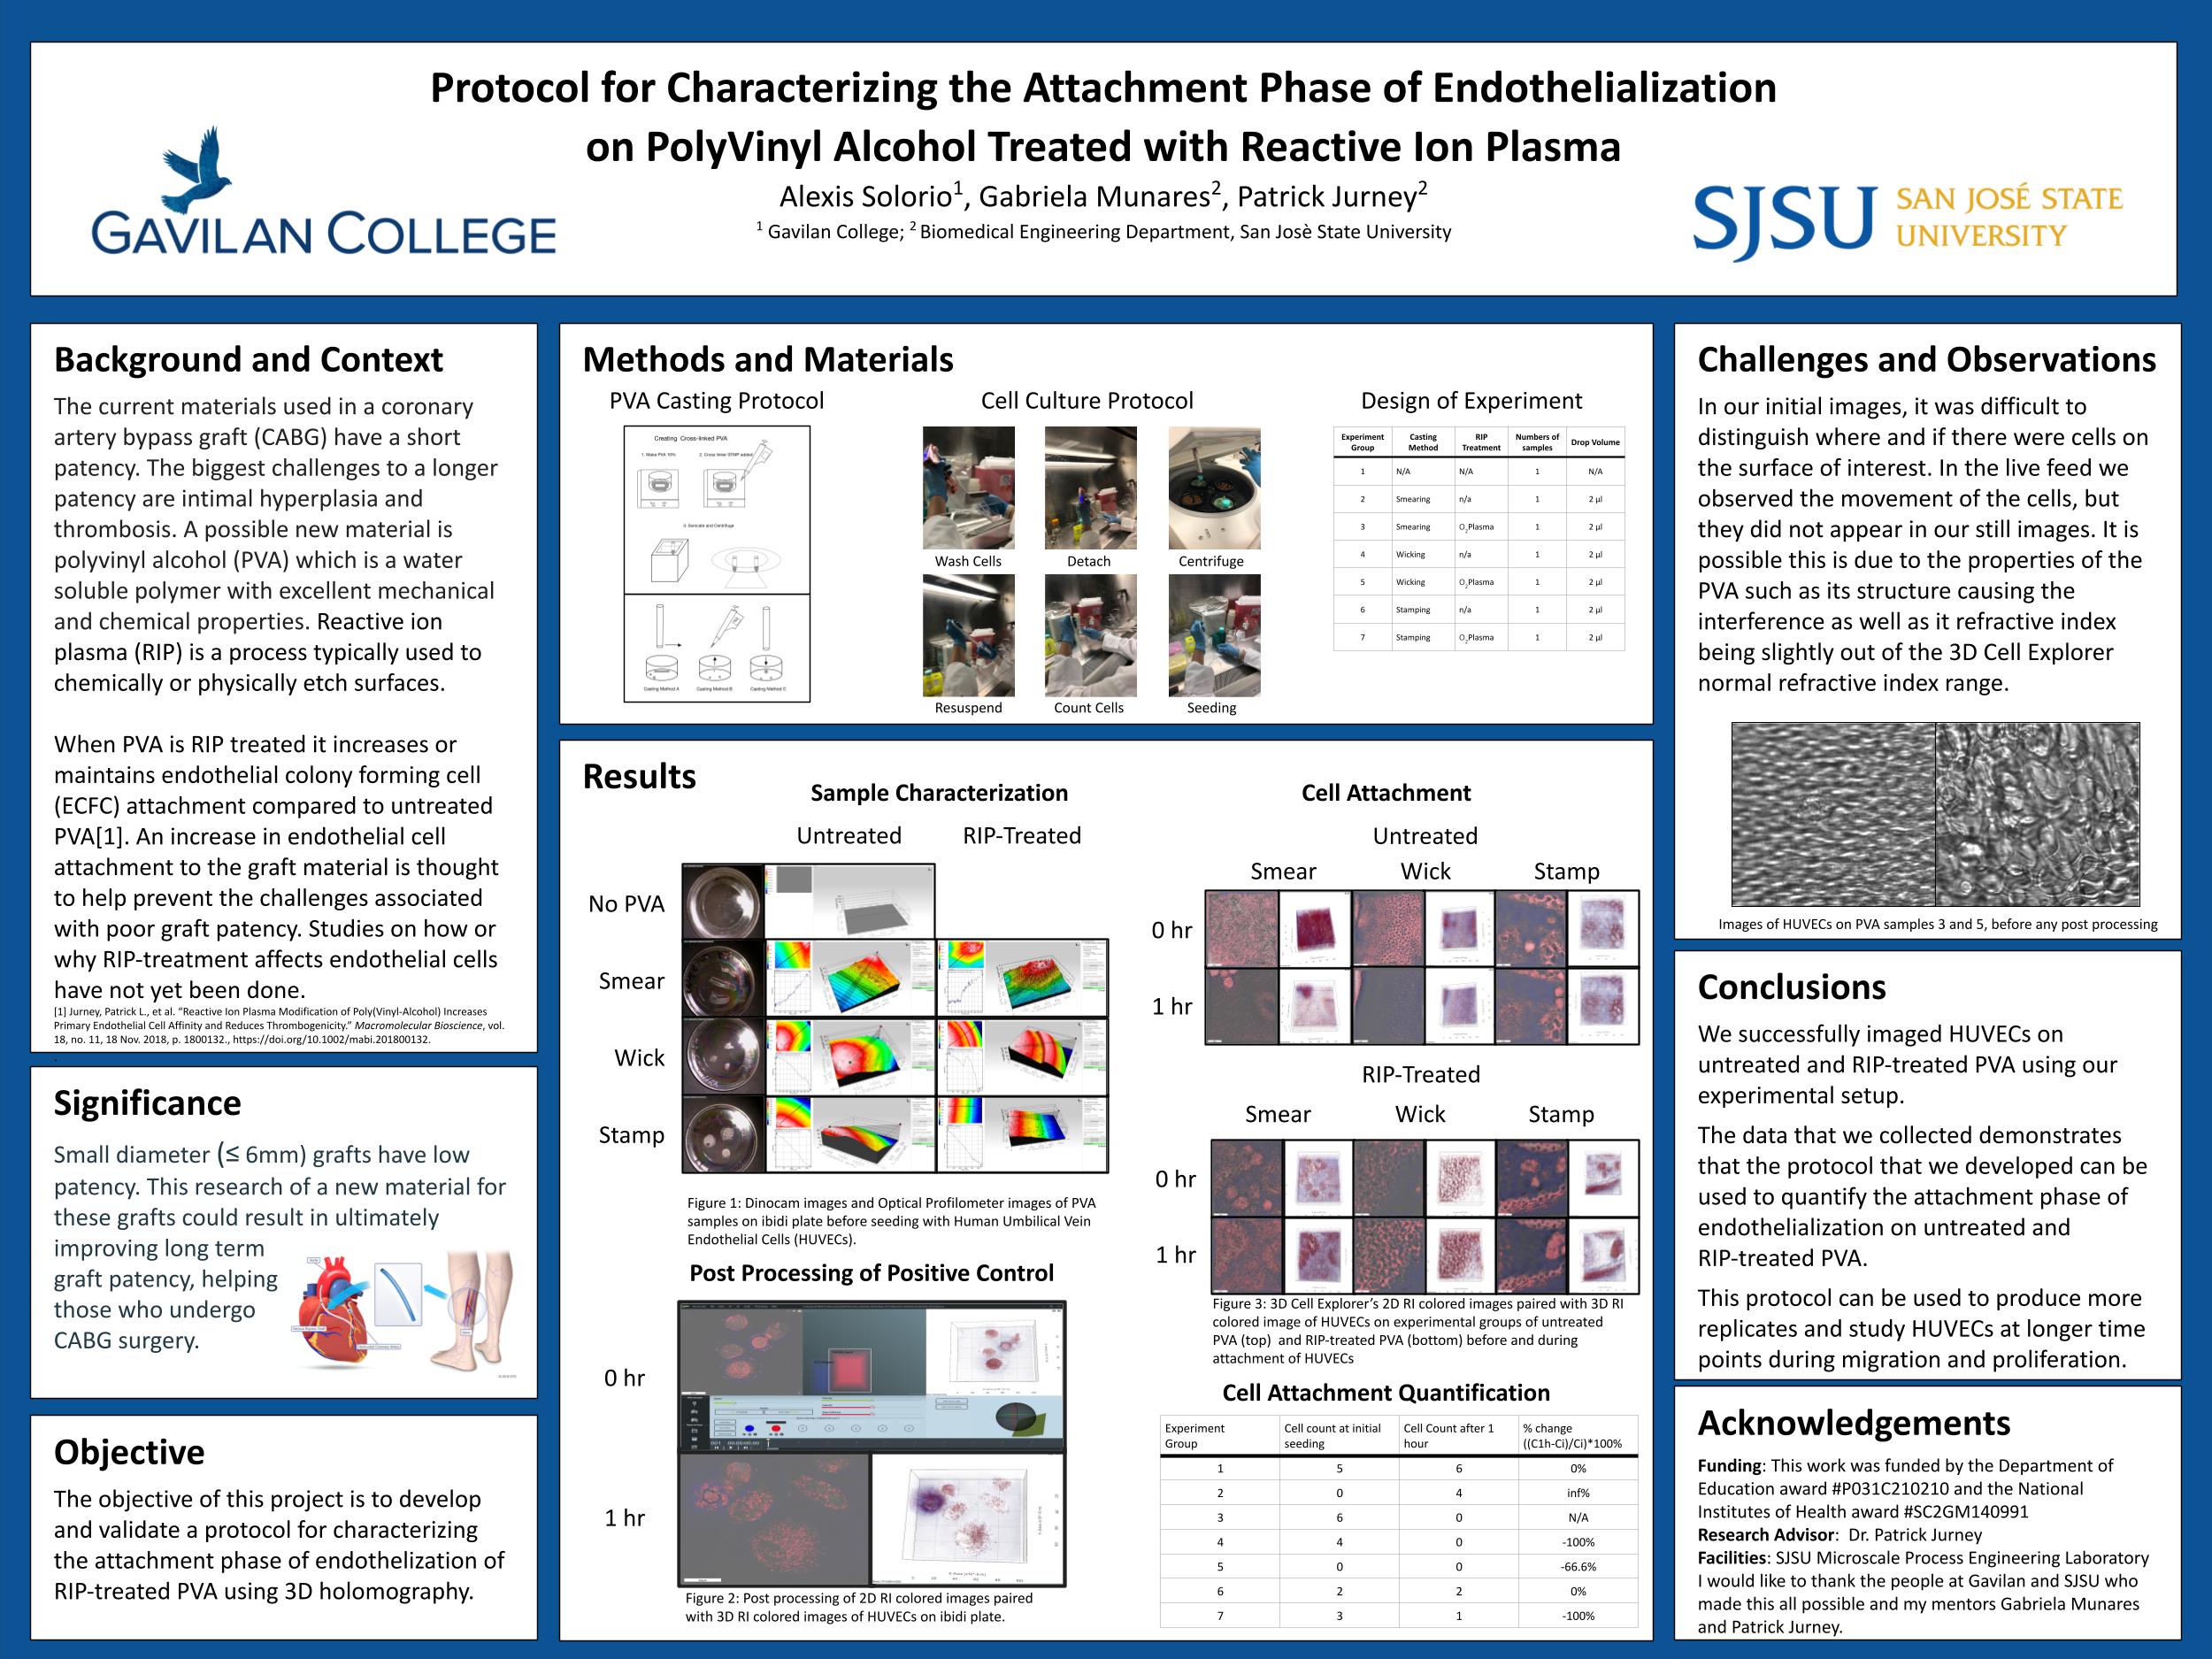 Patrick Jurney's student final poster board of research project.